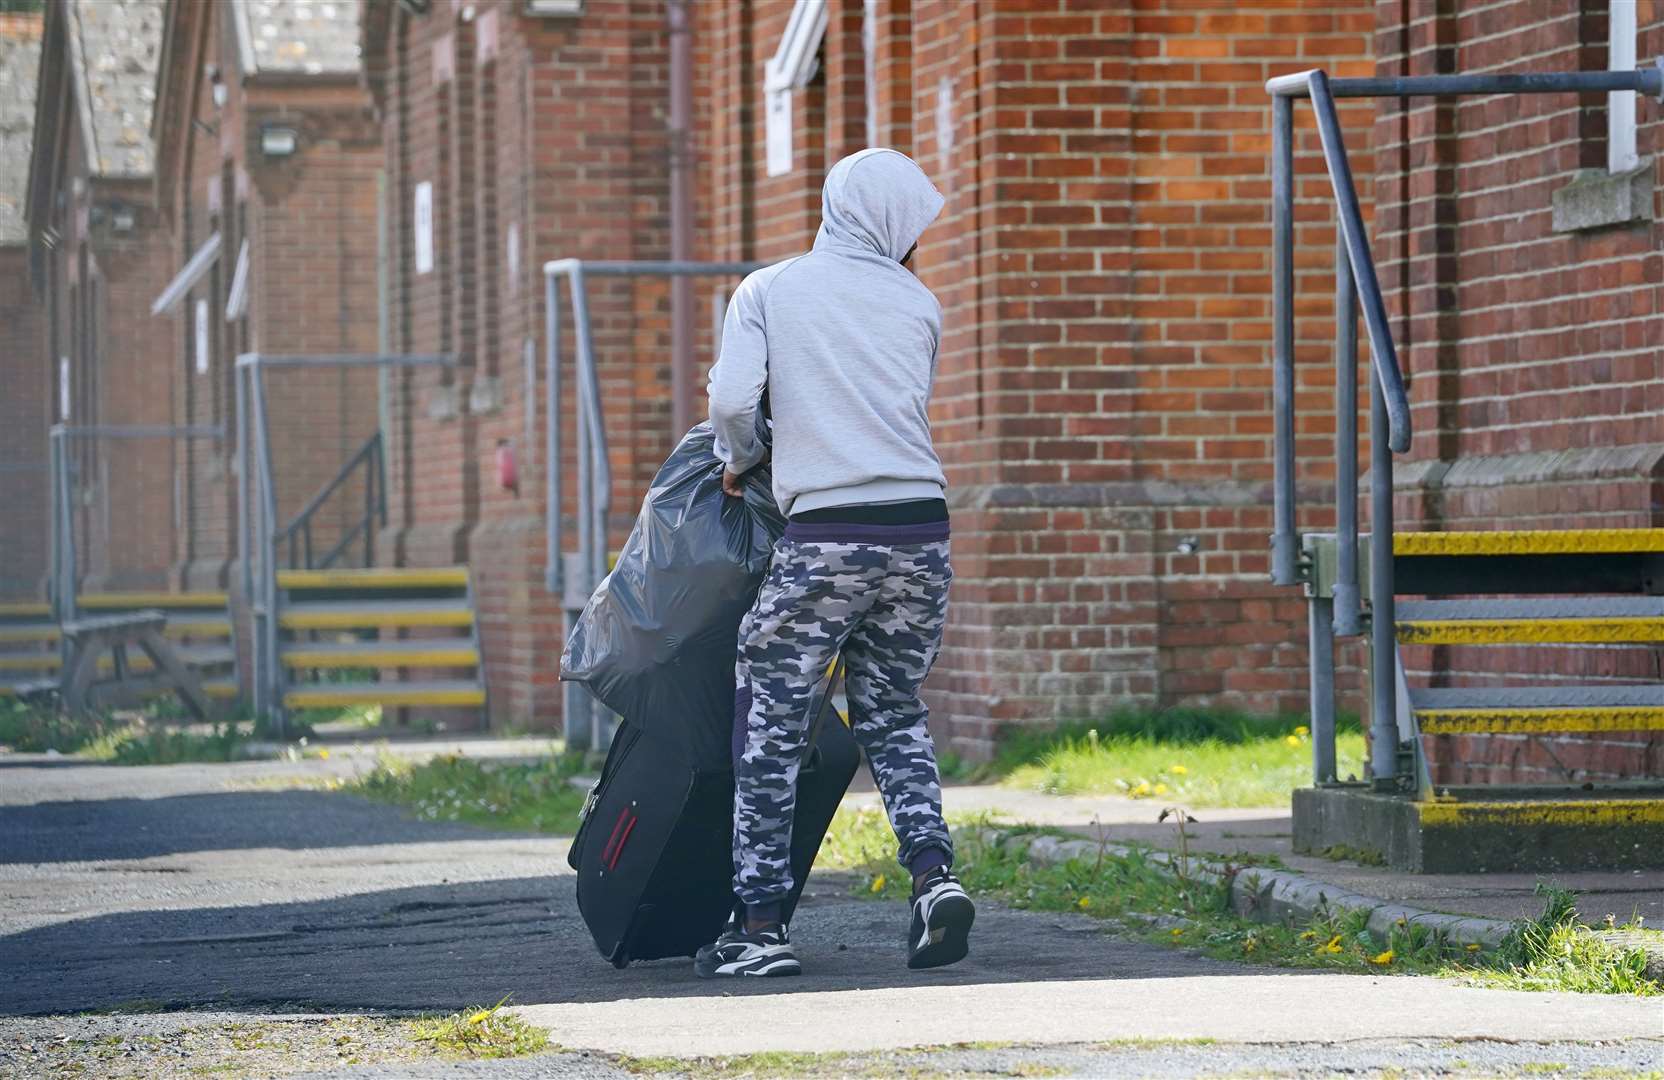 A man thought to be a migrant moves his belongings while he is housed at Napier Barracks in Folkestone, Kent (Gareth Fuller/PA)